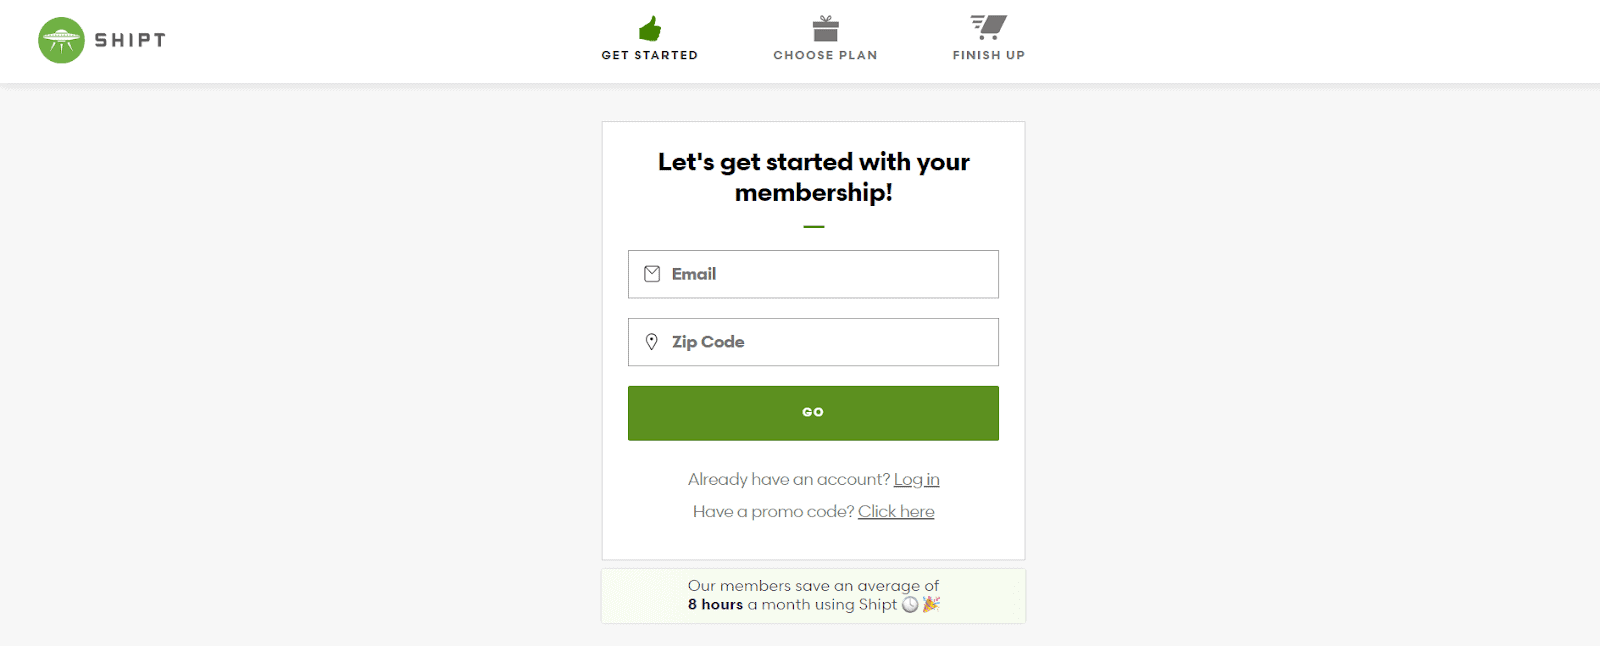 Shipt promo code for new users